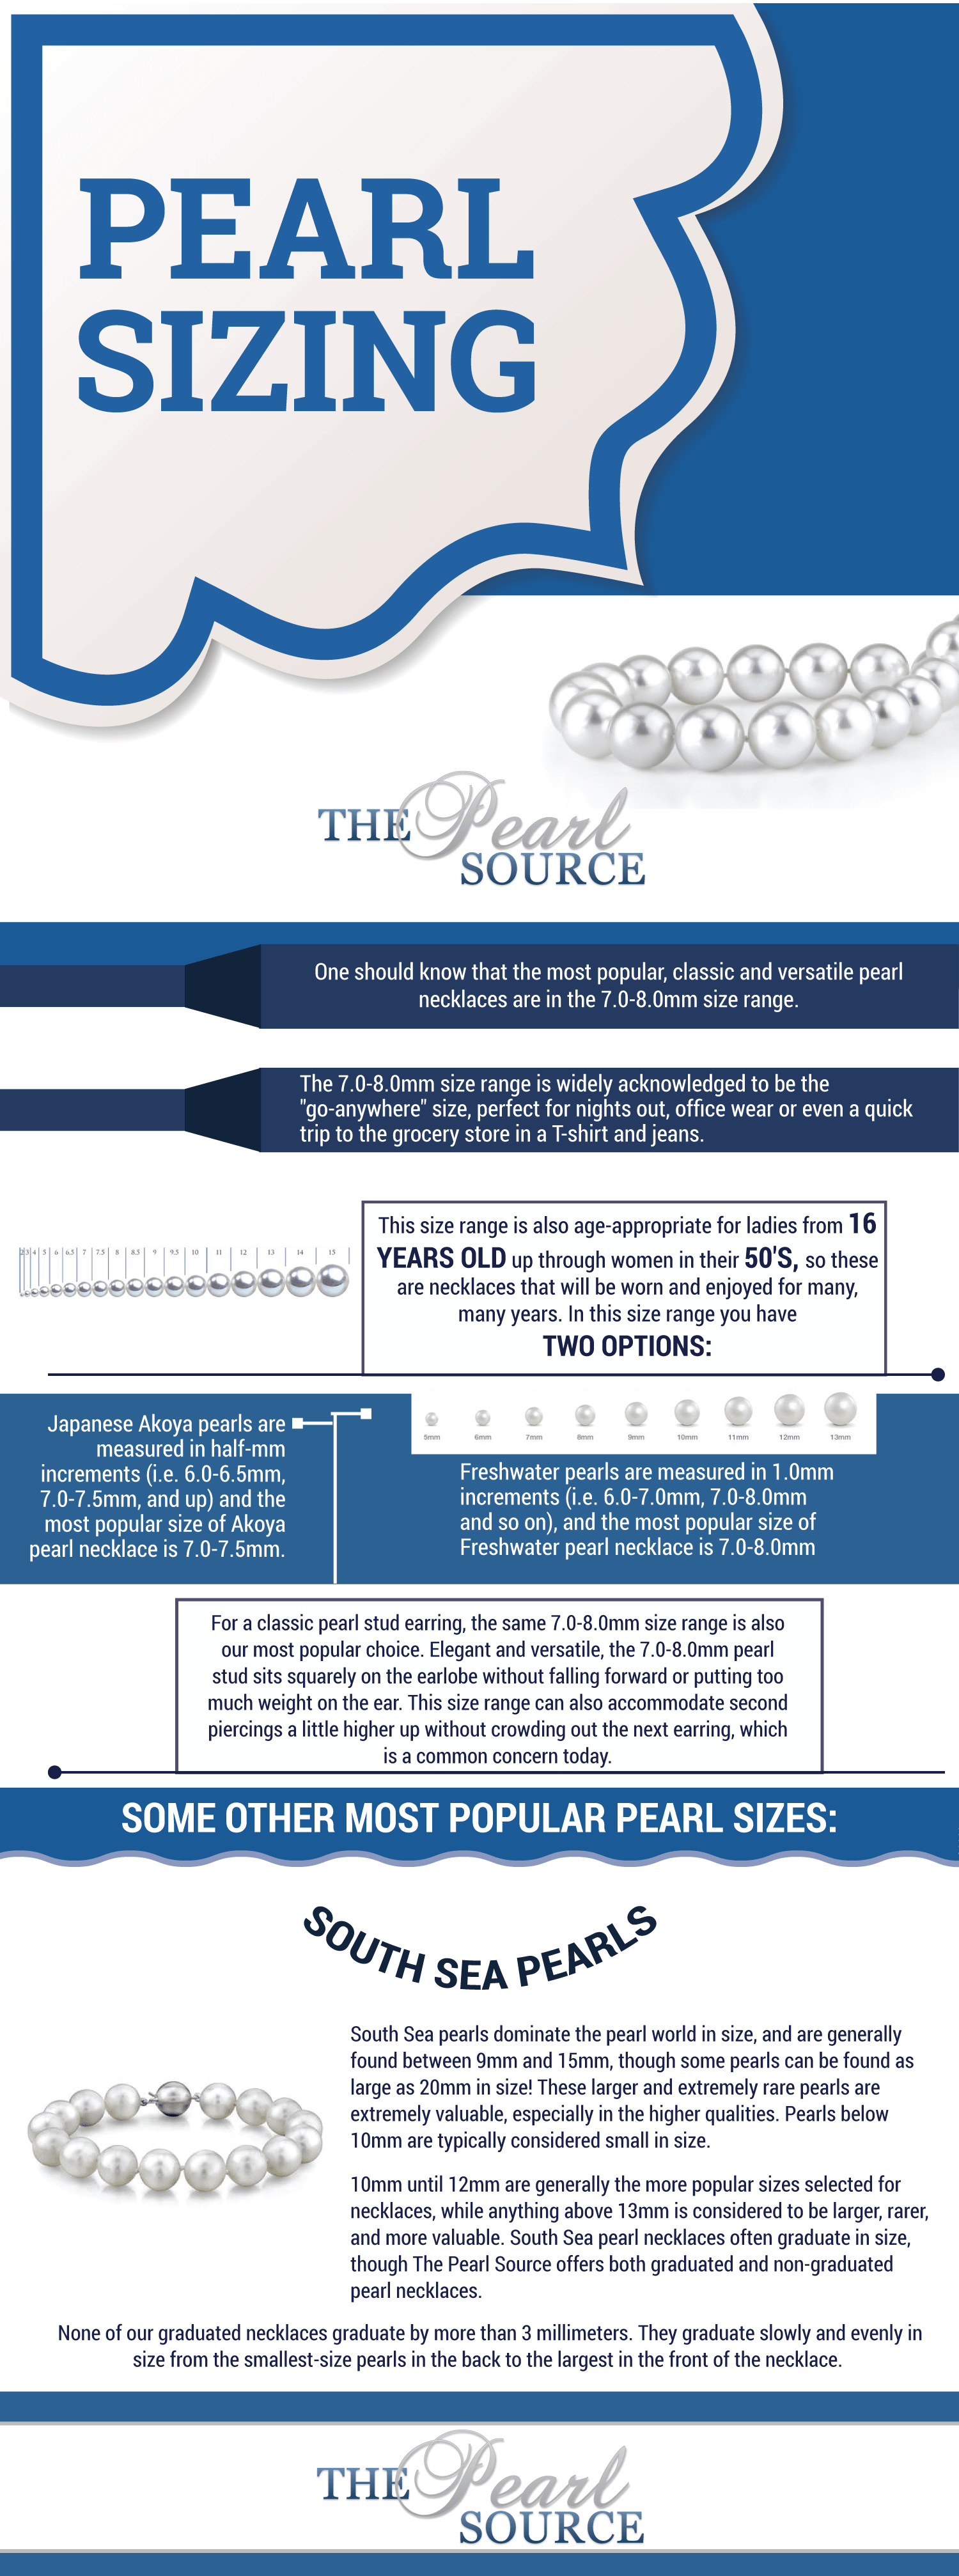 4 Types Of Pearls And Their Grading - Infographic